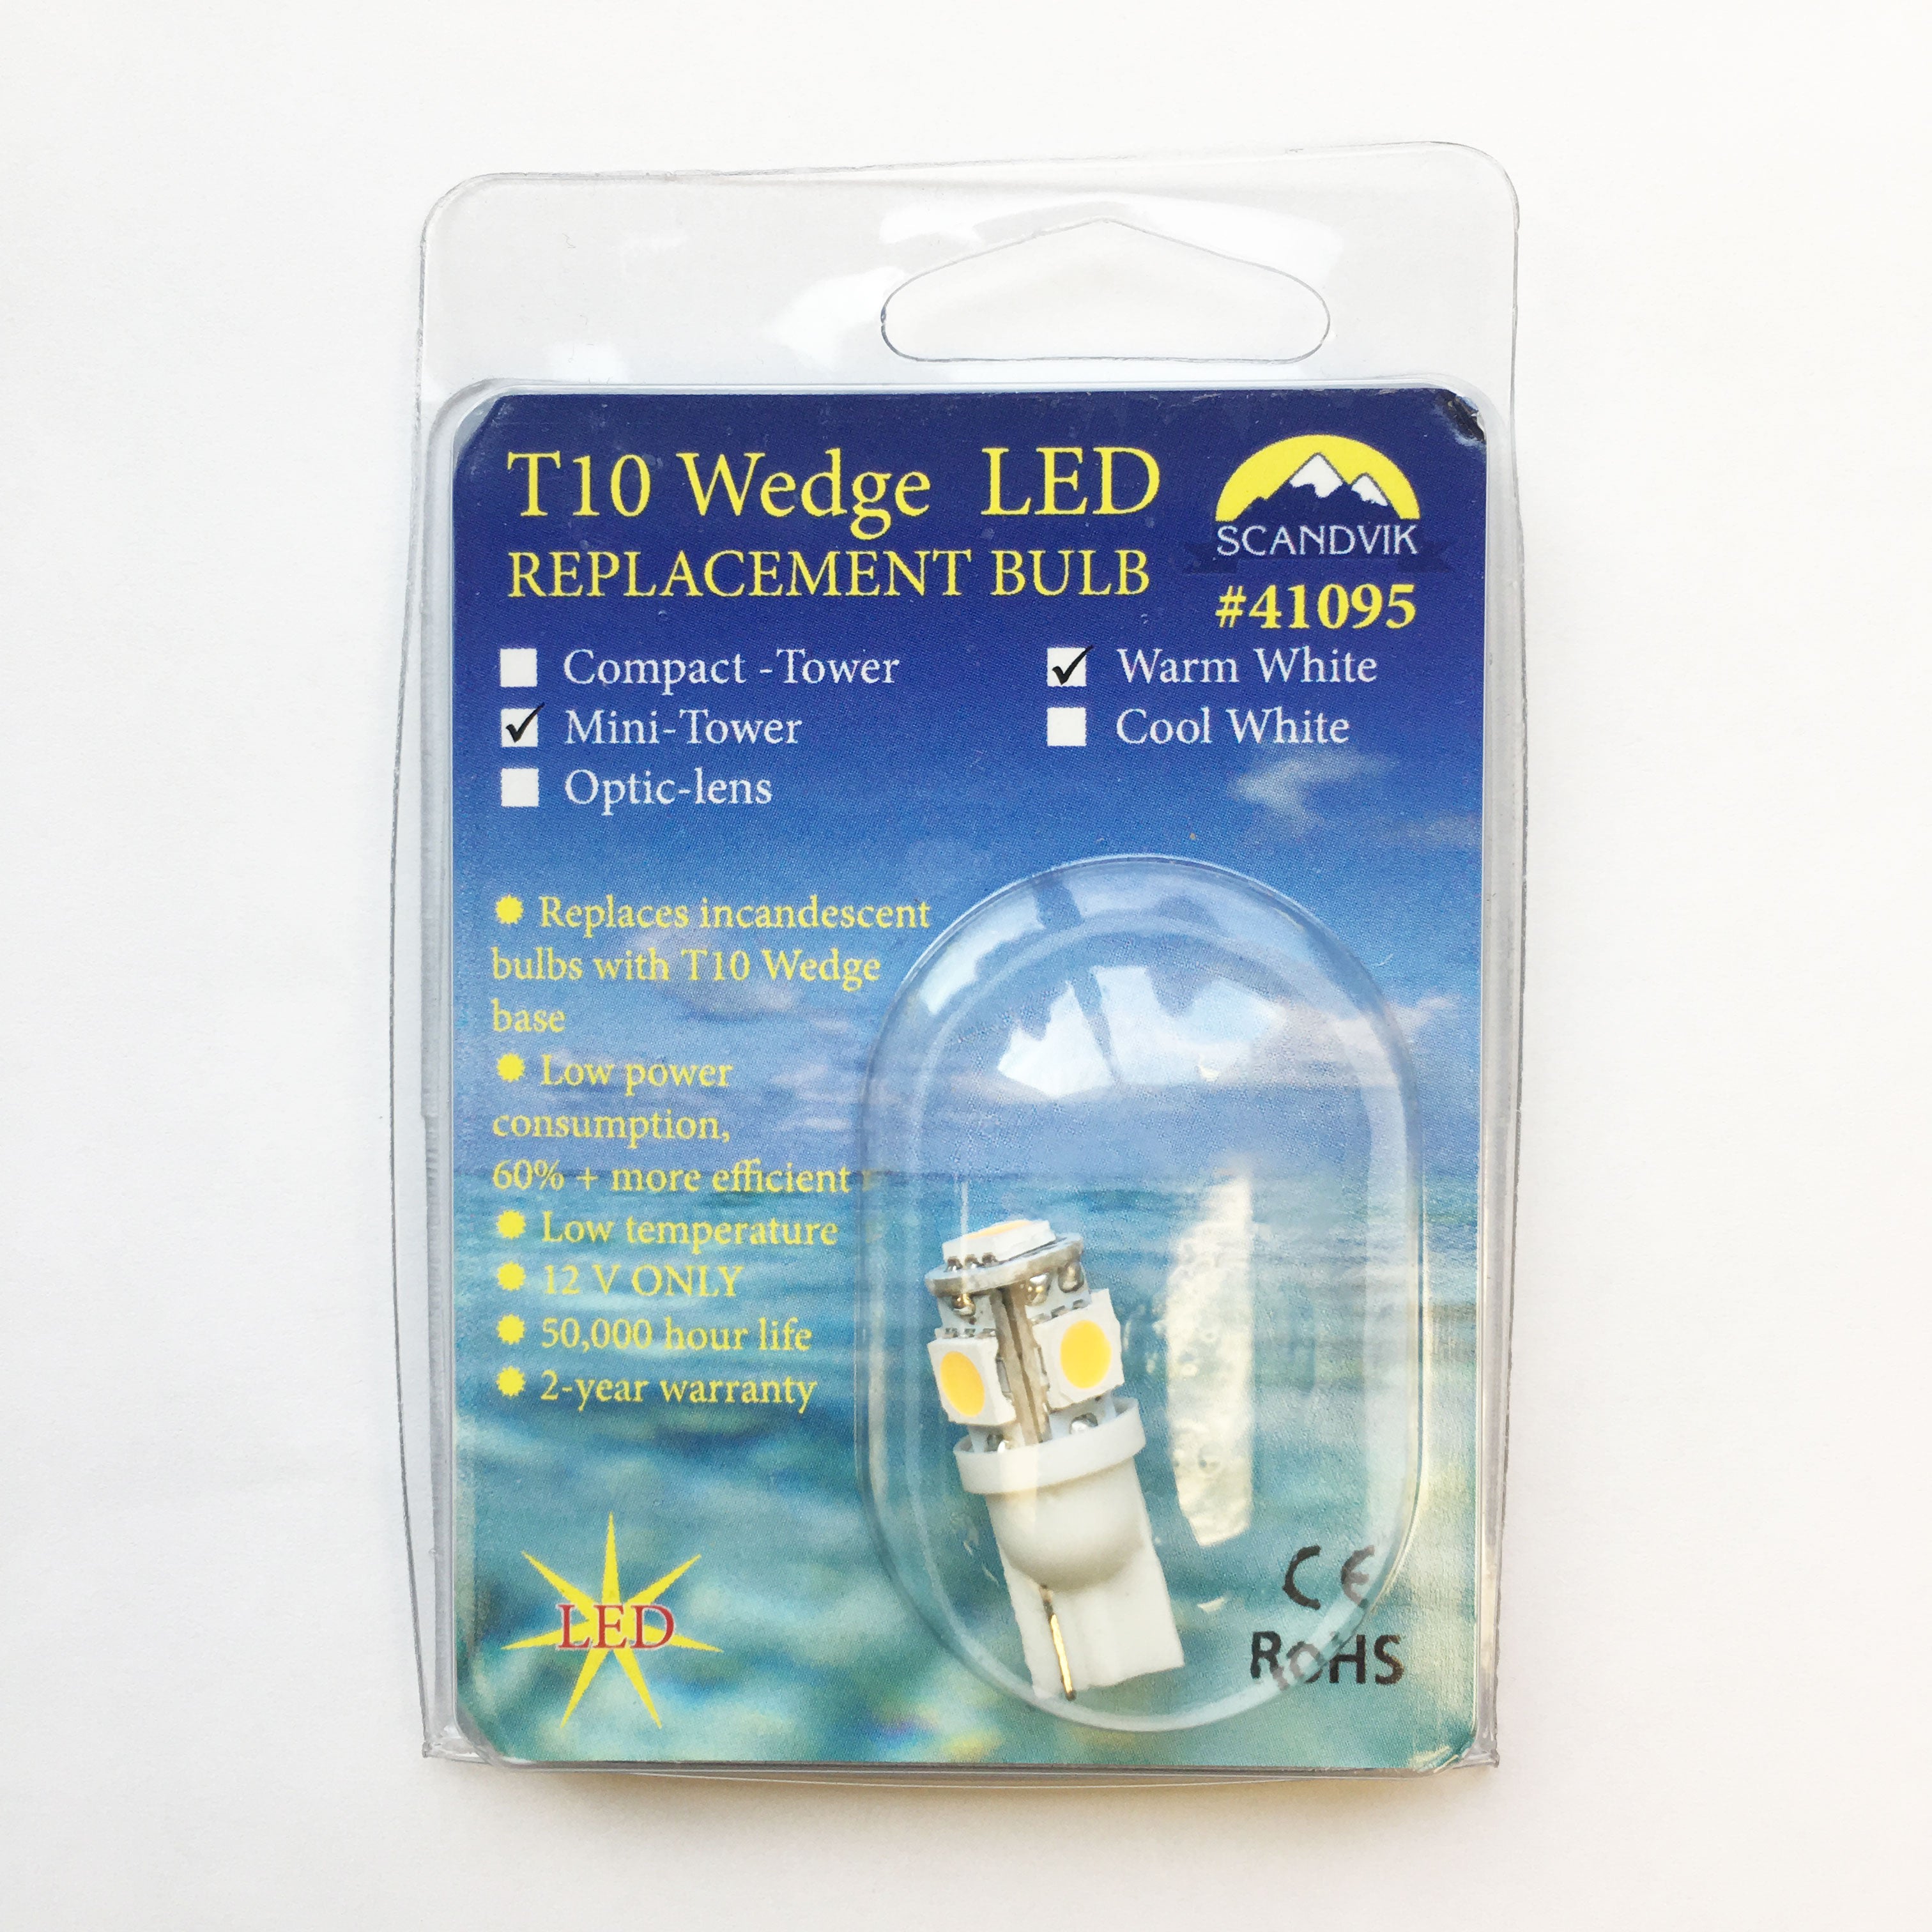 Scandvik Warm White LED T10 Wedge Replacement Bulb